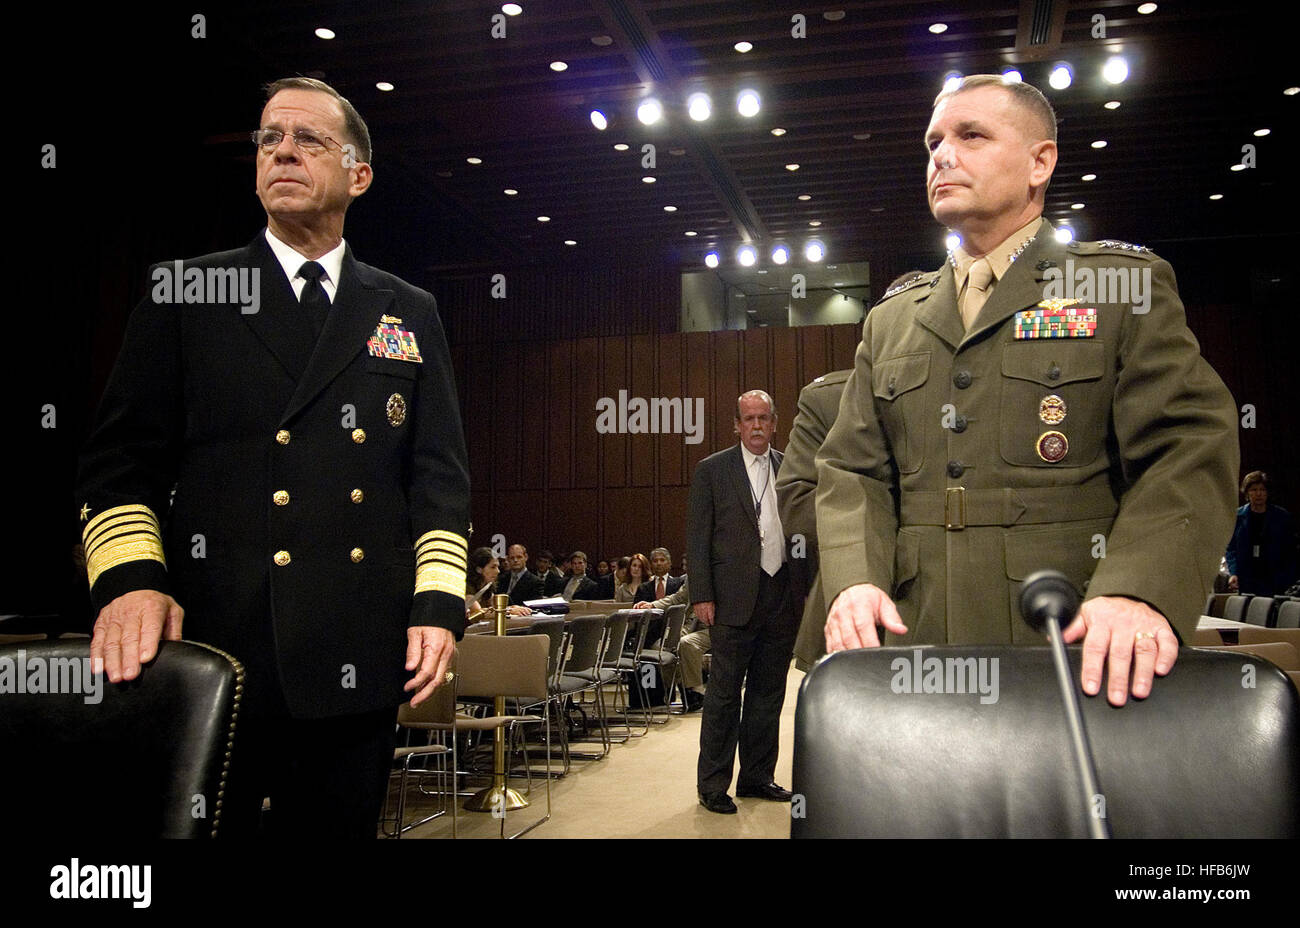 070731-N-0696M-021 WASHINGTON, D.C. (July 31, 2007) - Chief of Naval Operations, Adm. Mike Mullen and Commander, U.S. Strategic Command, Gen. James E. Cartwright, prepare to testify during their confirmation hearing in front of the Senate Armed Services Committee for appointment to Chairman and Vice-Chairman of the Joint Chiefs of Staff at Hart Senate Office Building, July 31, 2007. DoD photo by Mass Communication Specialist 1st Class Chad J. McNeeley (RELEASED) Defense.gov photo essay 070731-N-0696M-021 Stock Photo